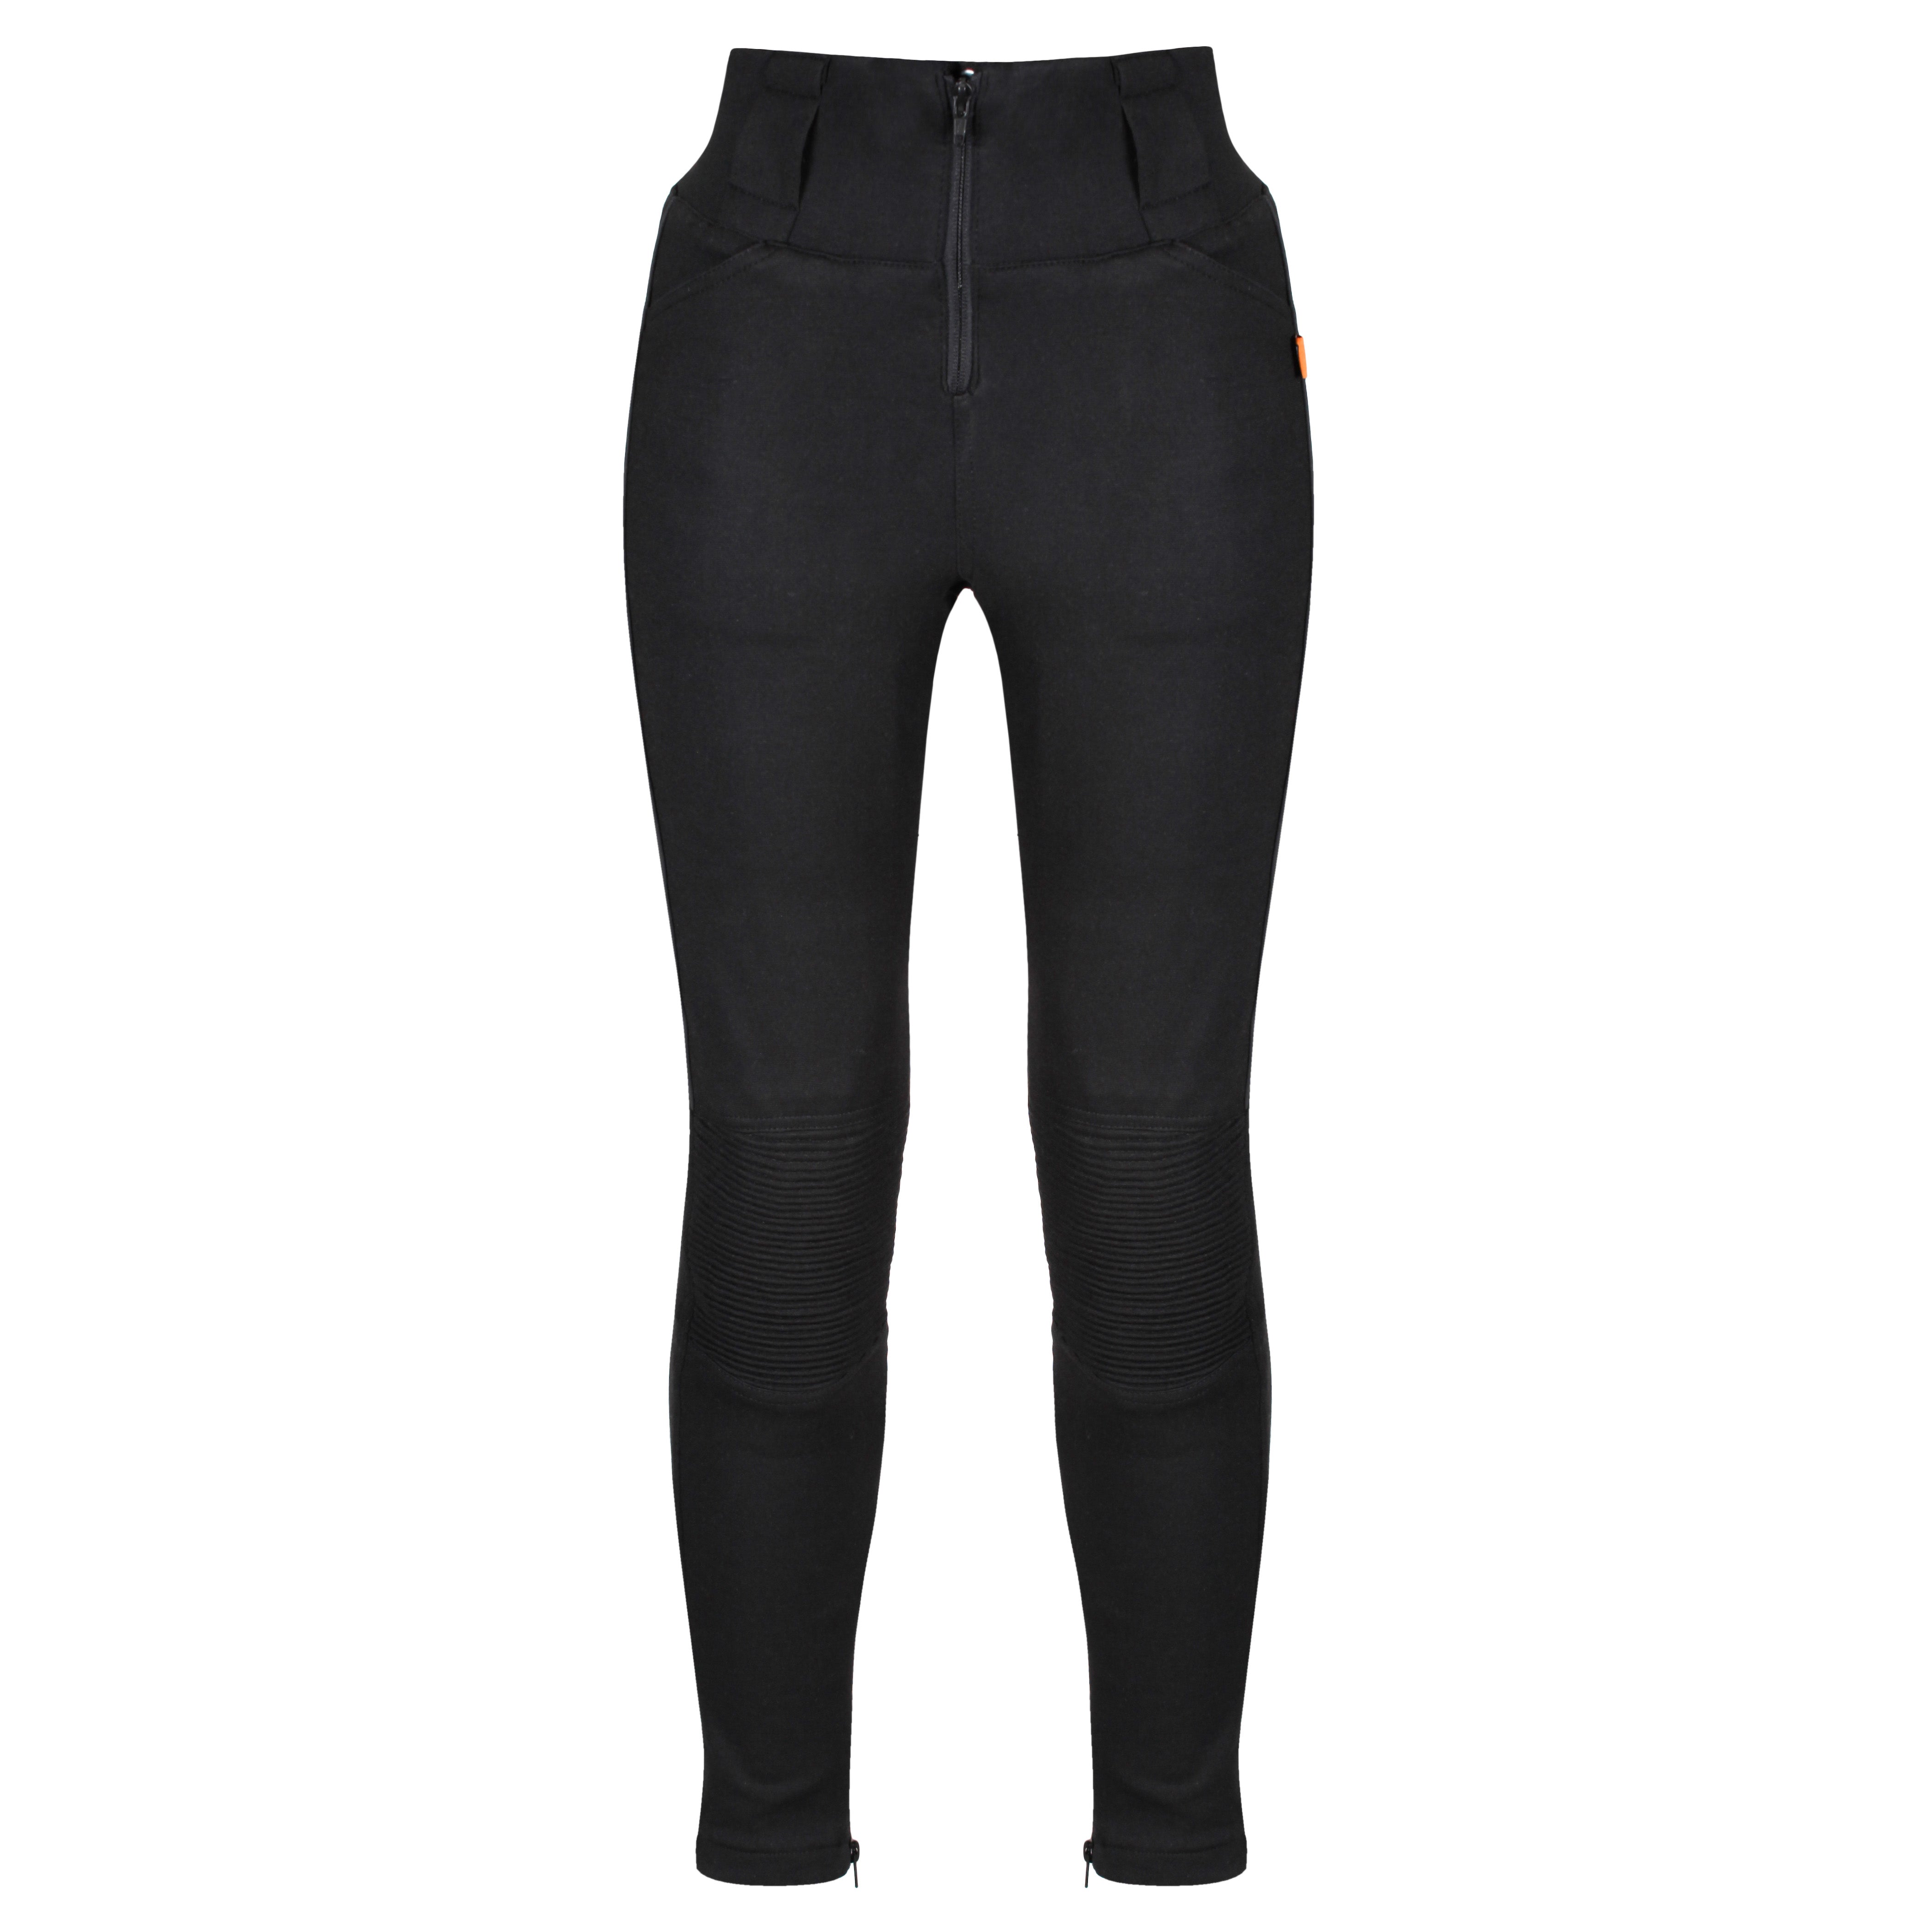 Motorcycle leggings for woman with a zip from MotoGirl